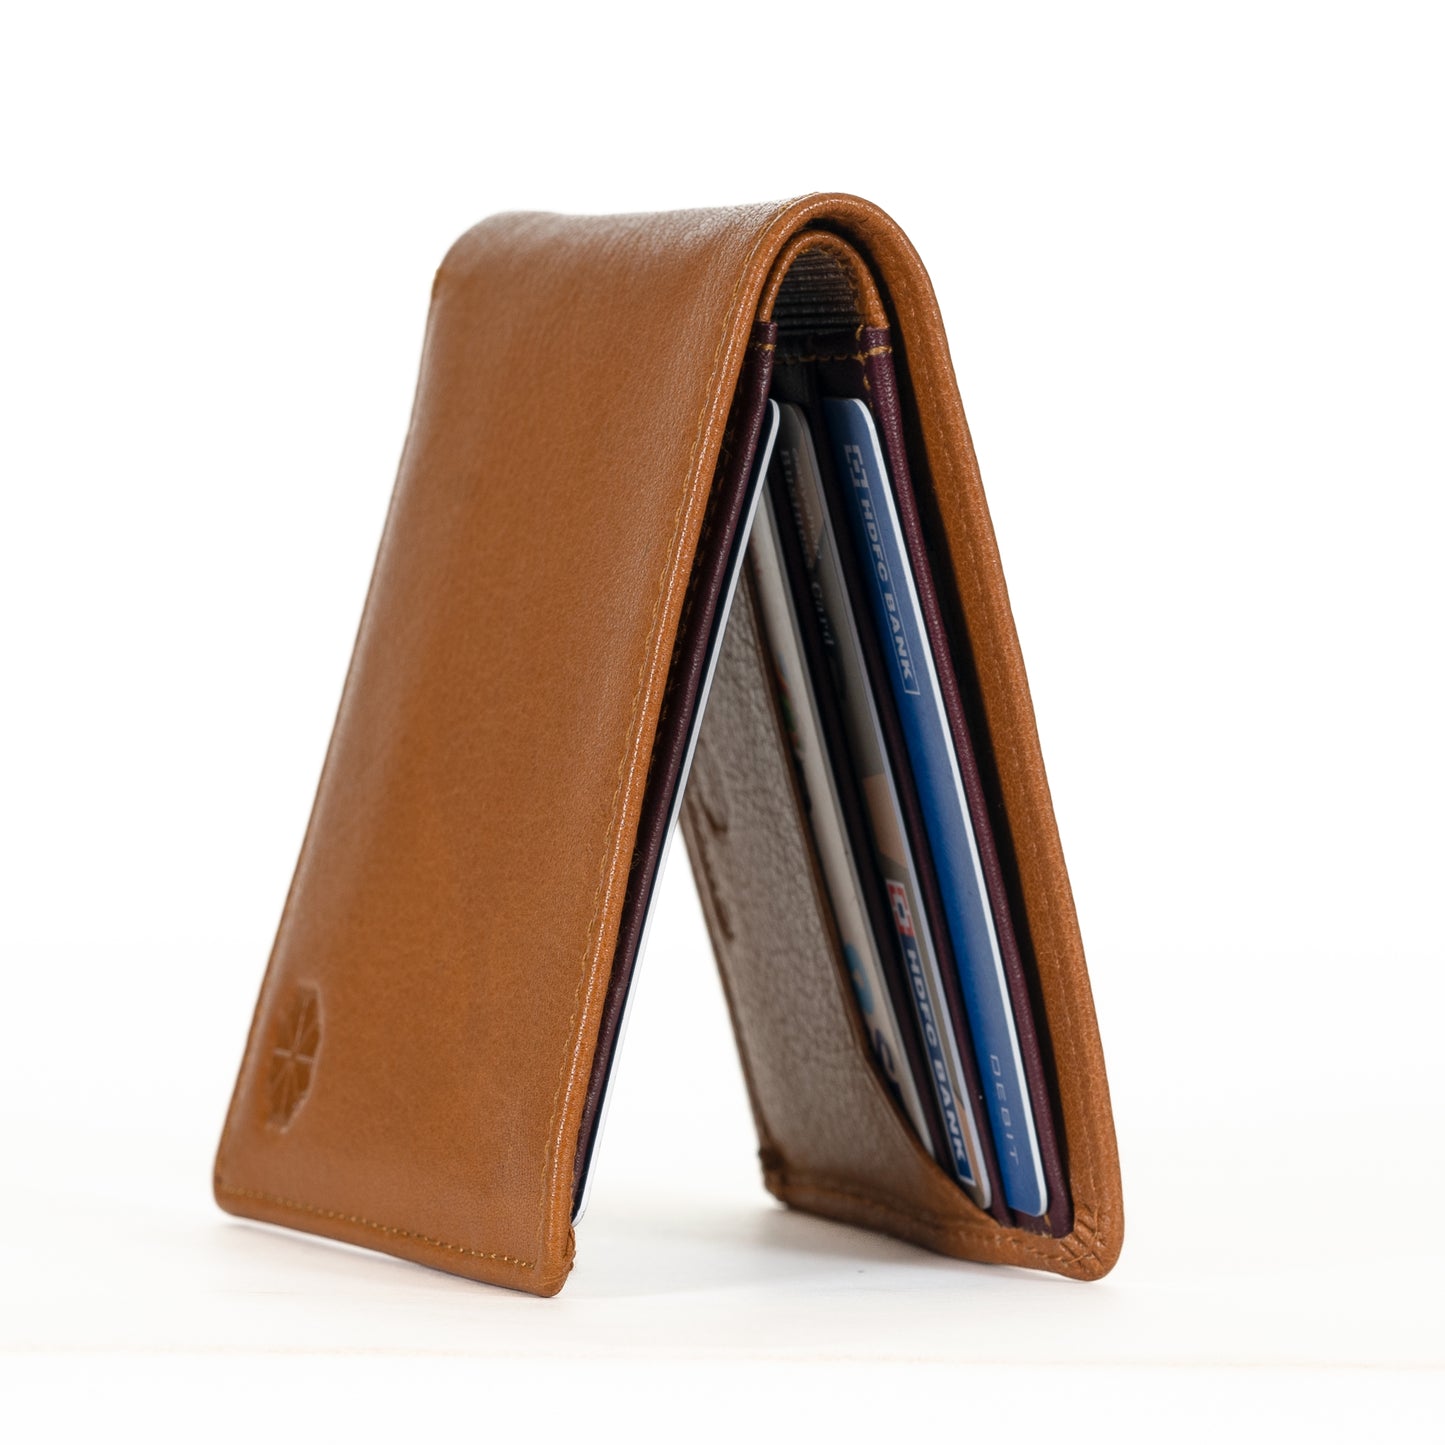 Compact Leather Wallet for Men | RFID Blocking | Bifold Design with 6 Card Slots